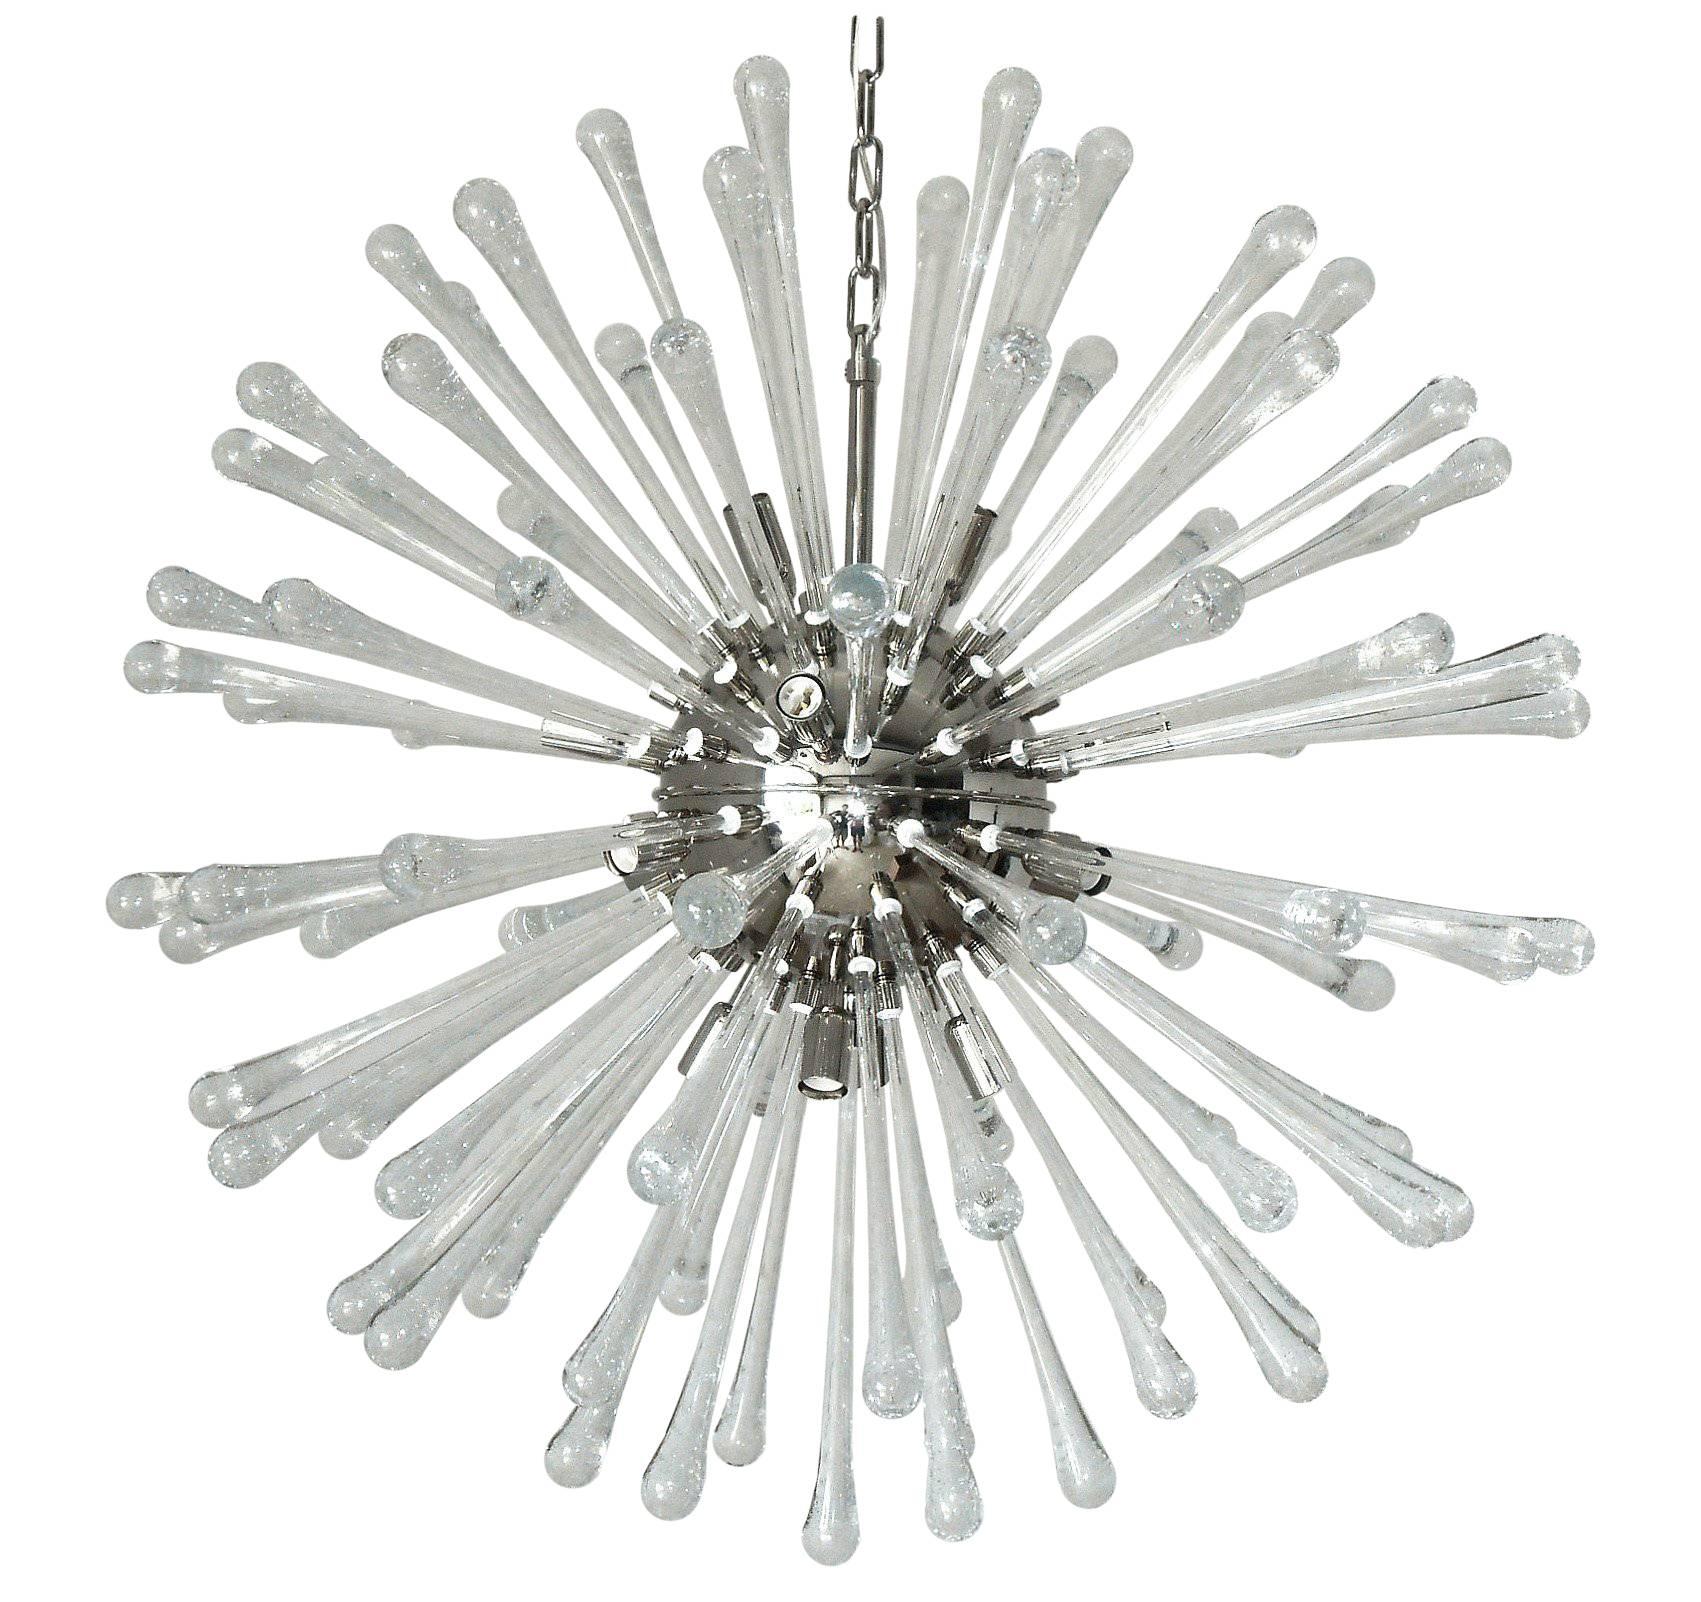 Italian modern Sputnik chandelier with clear drop shaped Murano glasses hand blown with bubbles within the glass in Bollicine technique, mounted on chrome frame / Designed by Fabio Bergomi for Fabio Ltd / Made in Italy
16 lights / E12 or E14 type /